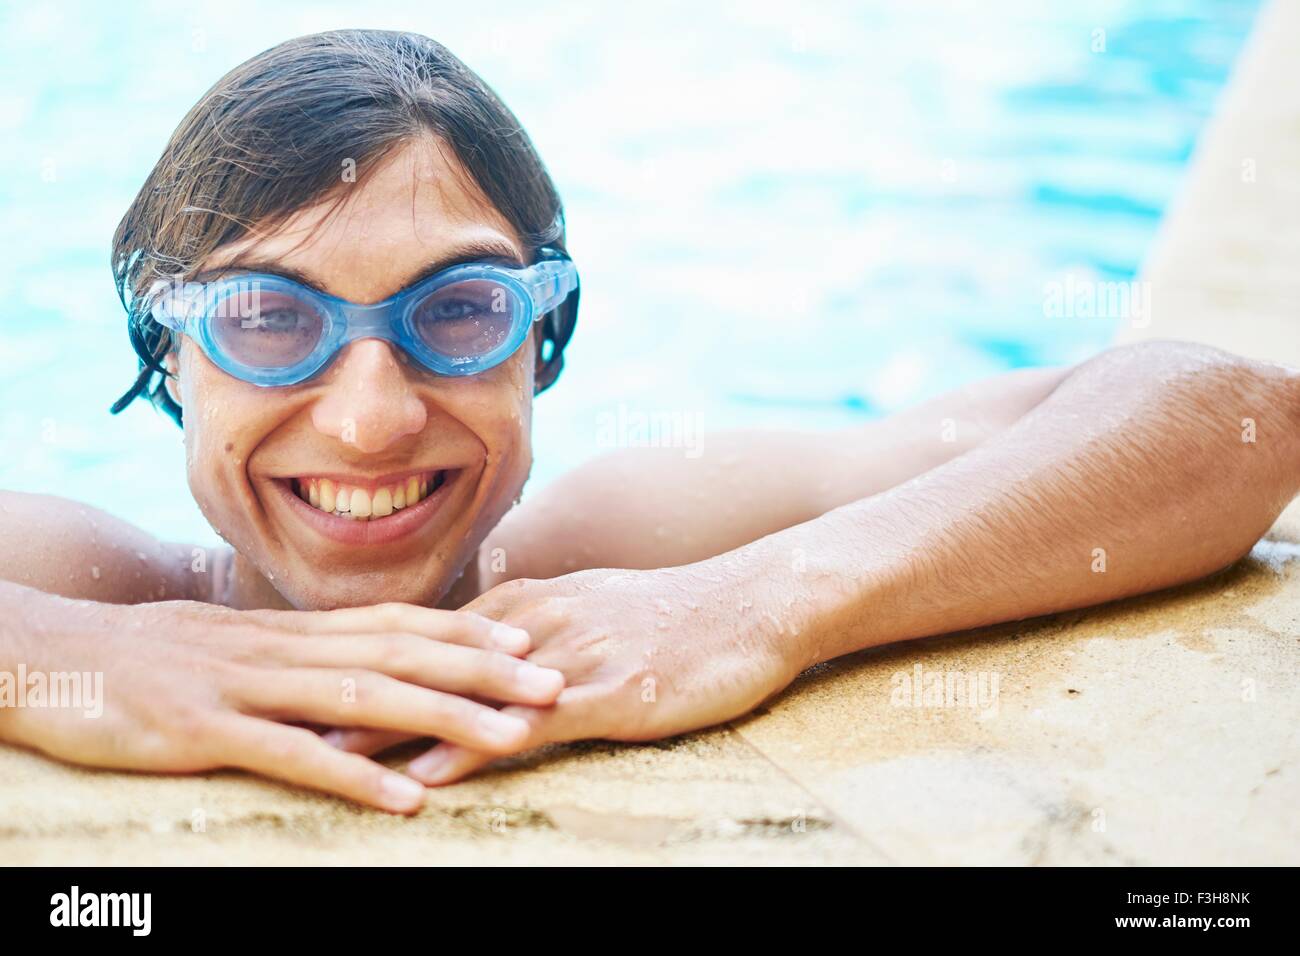 Portrait of young man wearing goggles in swimming pool Stock Photo